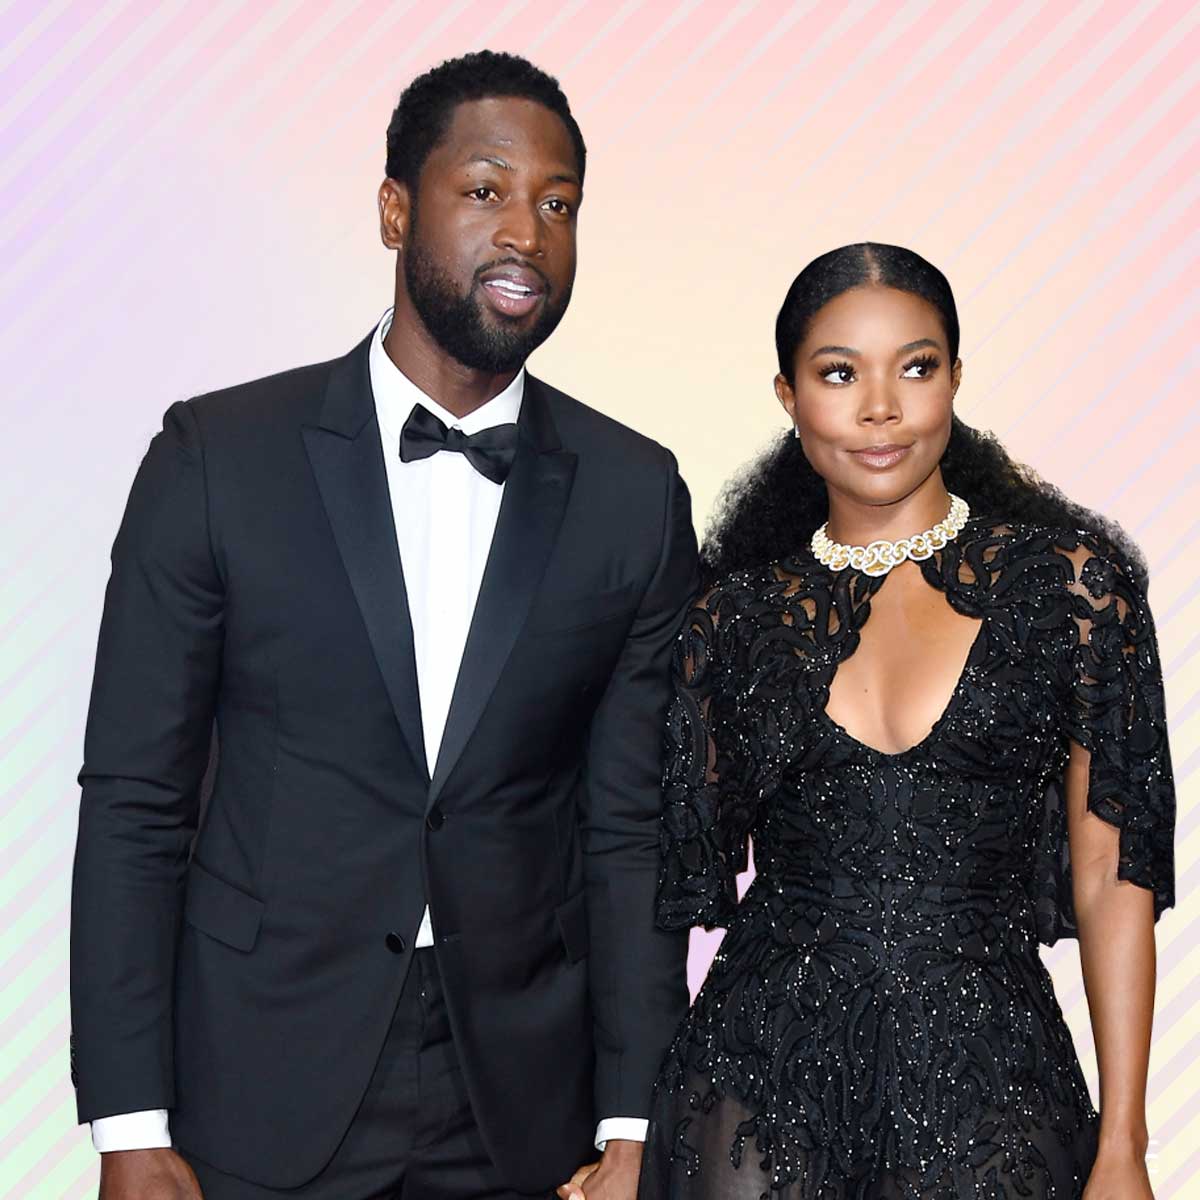 Dwyane Wade Calls Wife Gabrielle Union ‘One Strong Individual’ Following Revelation She Had ‘8 Or 9 Miscarriages’